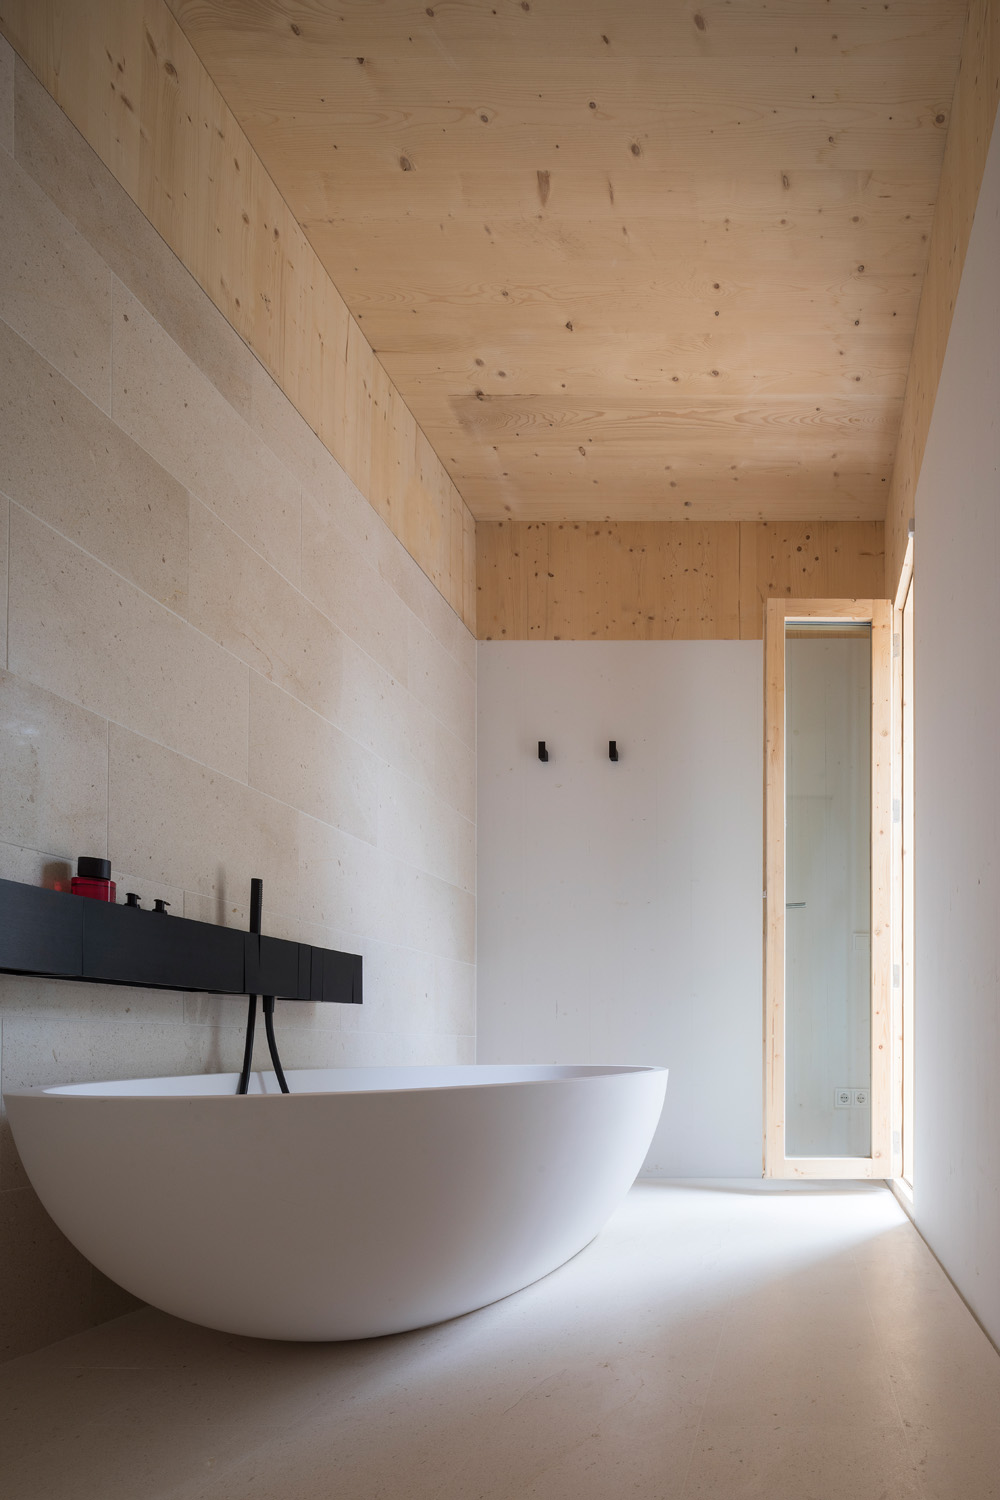 Bathroom by Marià Castelló - luxury modern architecture in Ibiza and Formentera